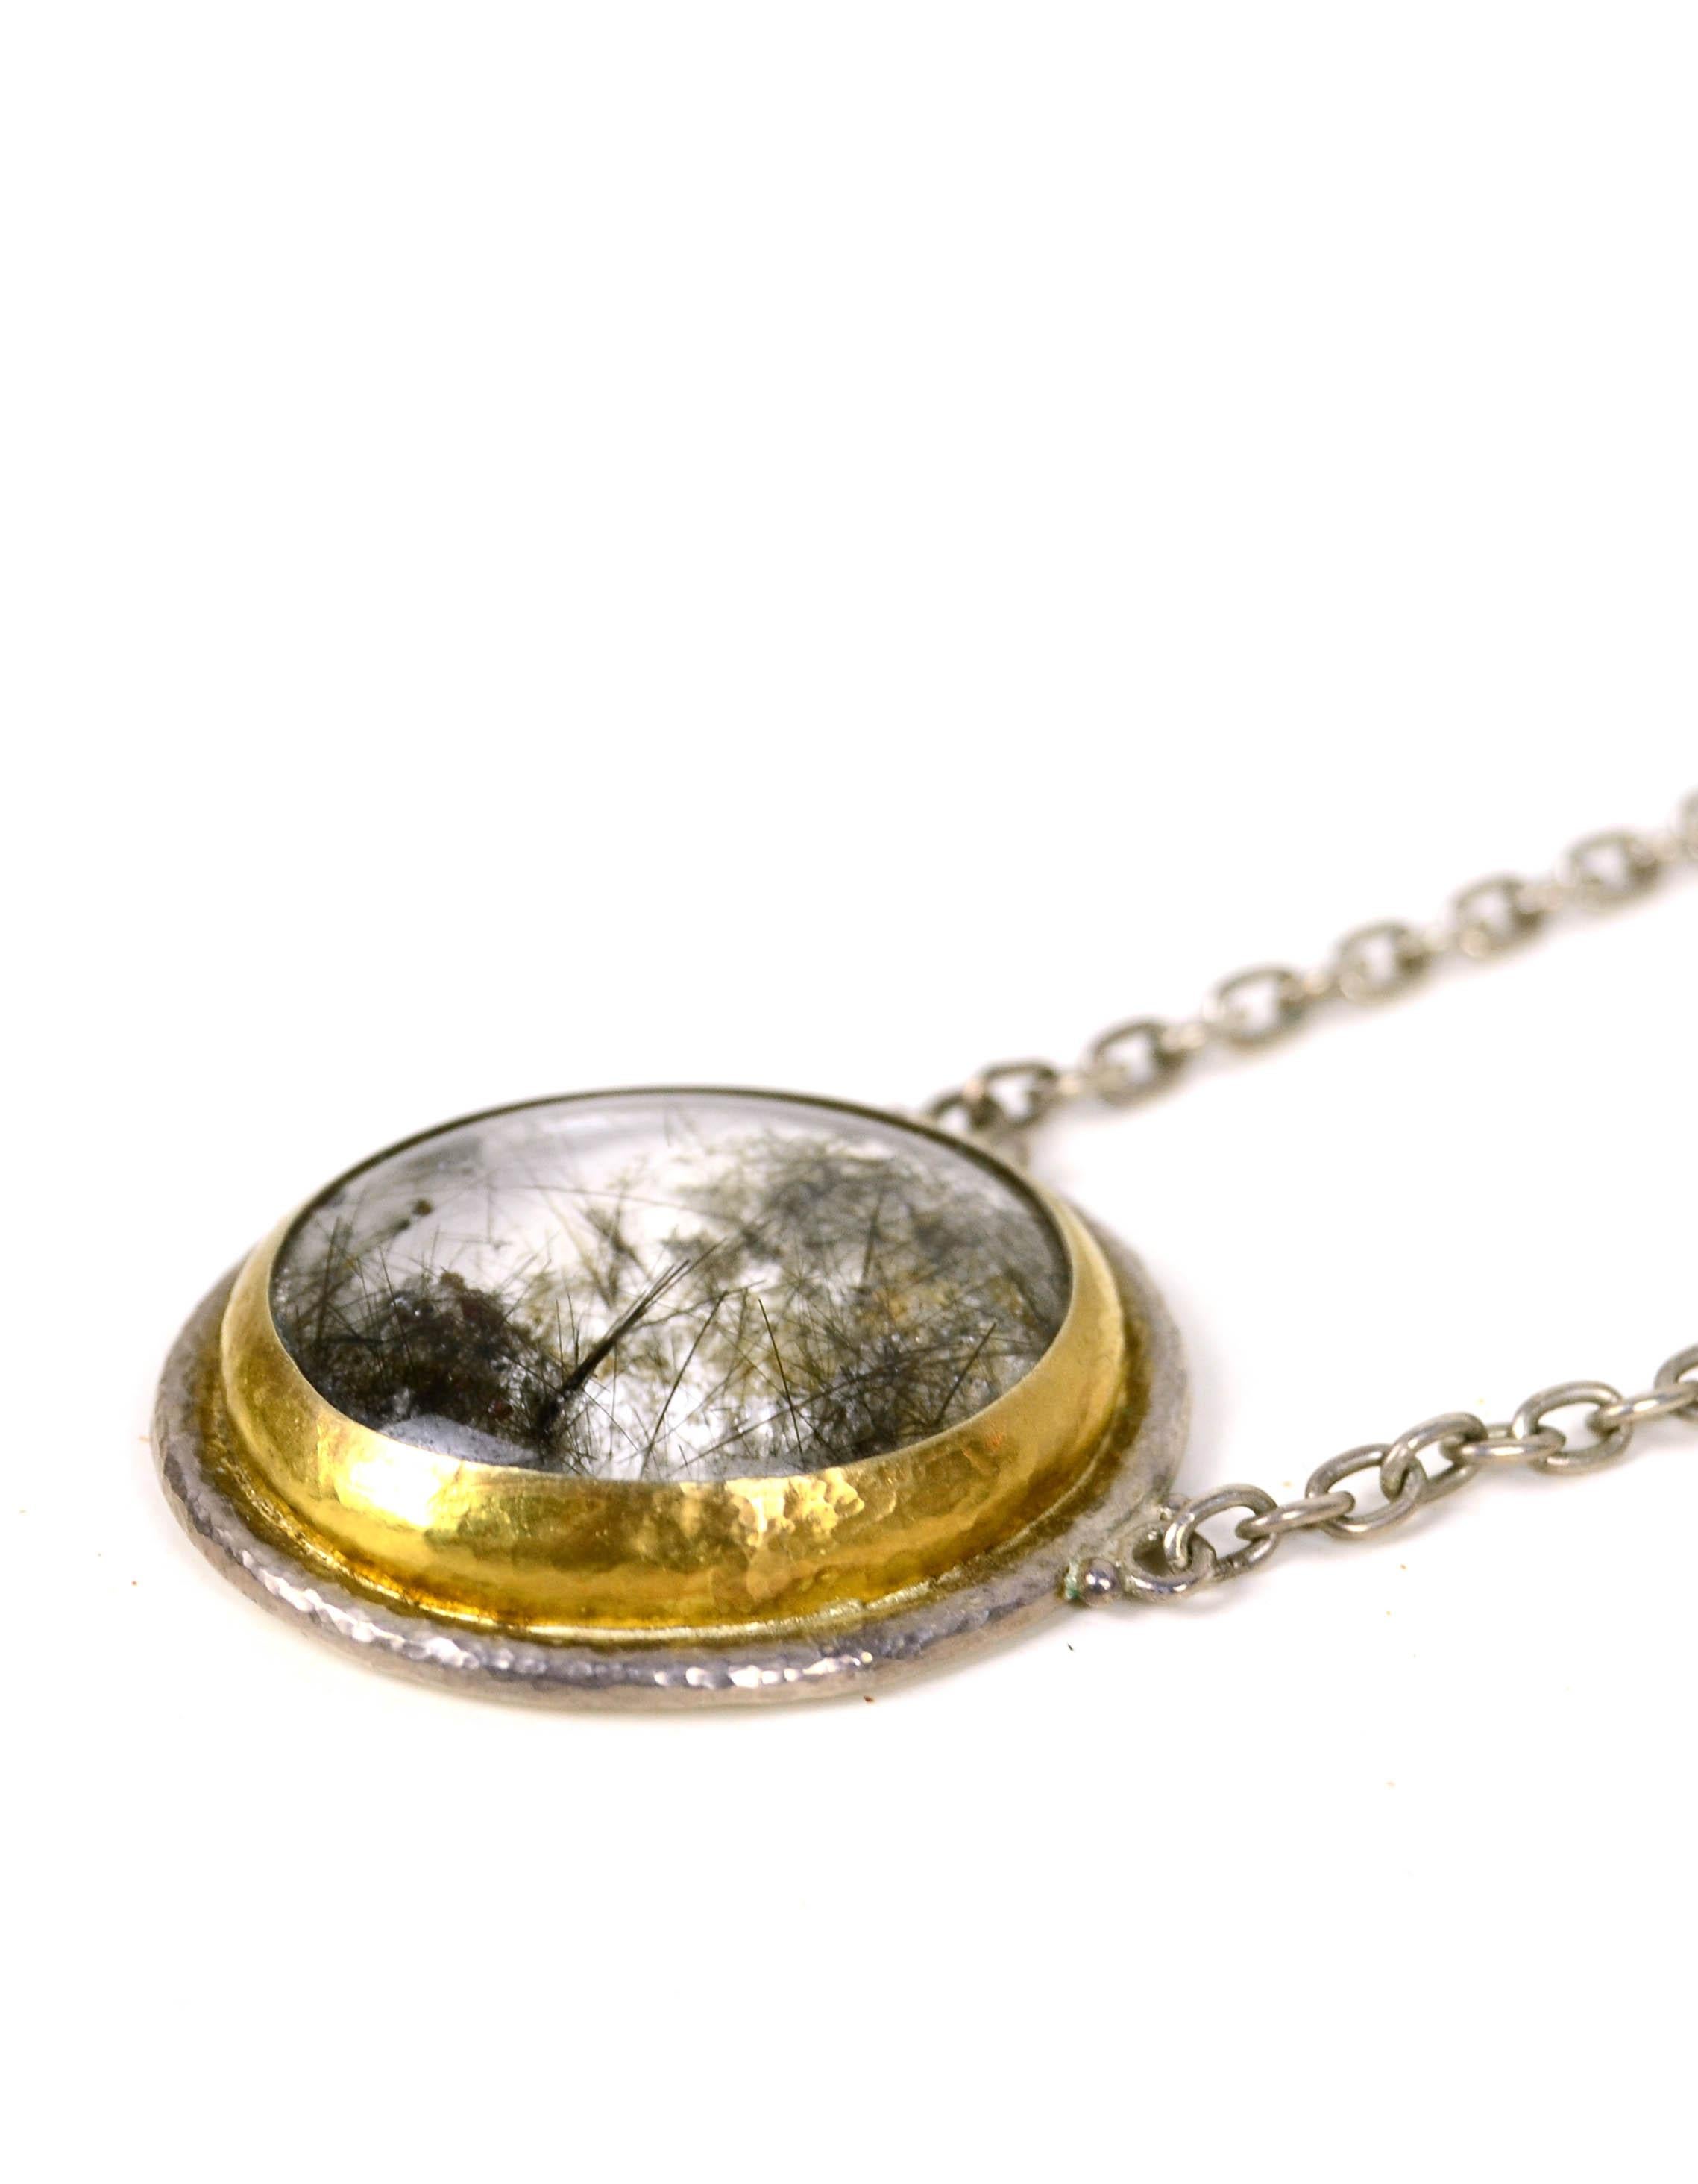 Oval Cut Gurhan One-of-a-Kind Sterling Necklace w/ Tourmalated Quartz Pendant w/ 24k Gold